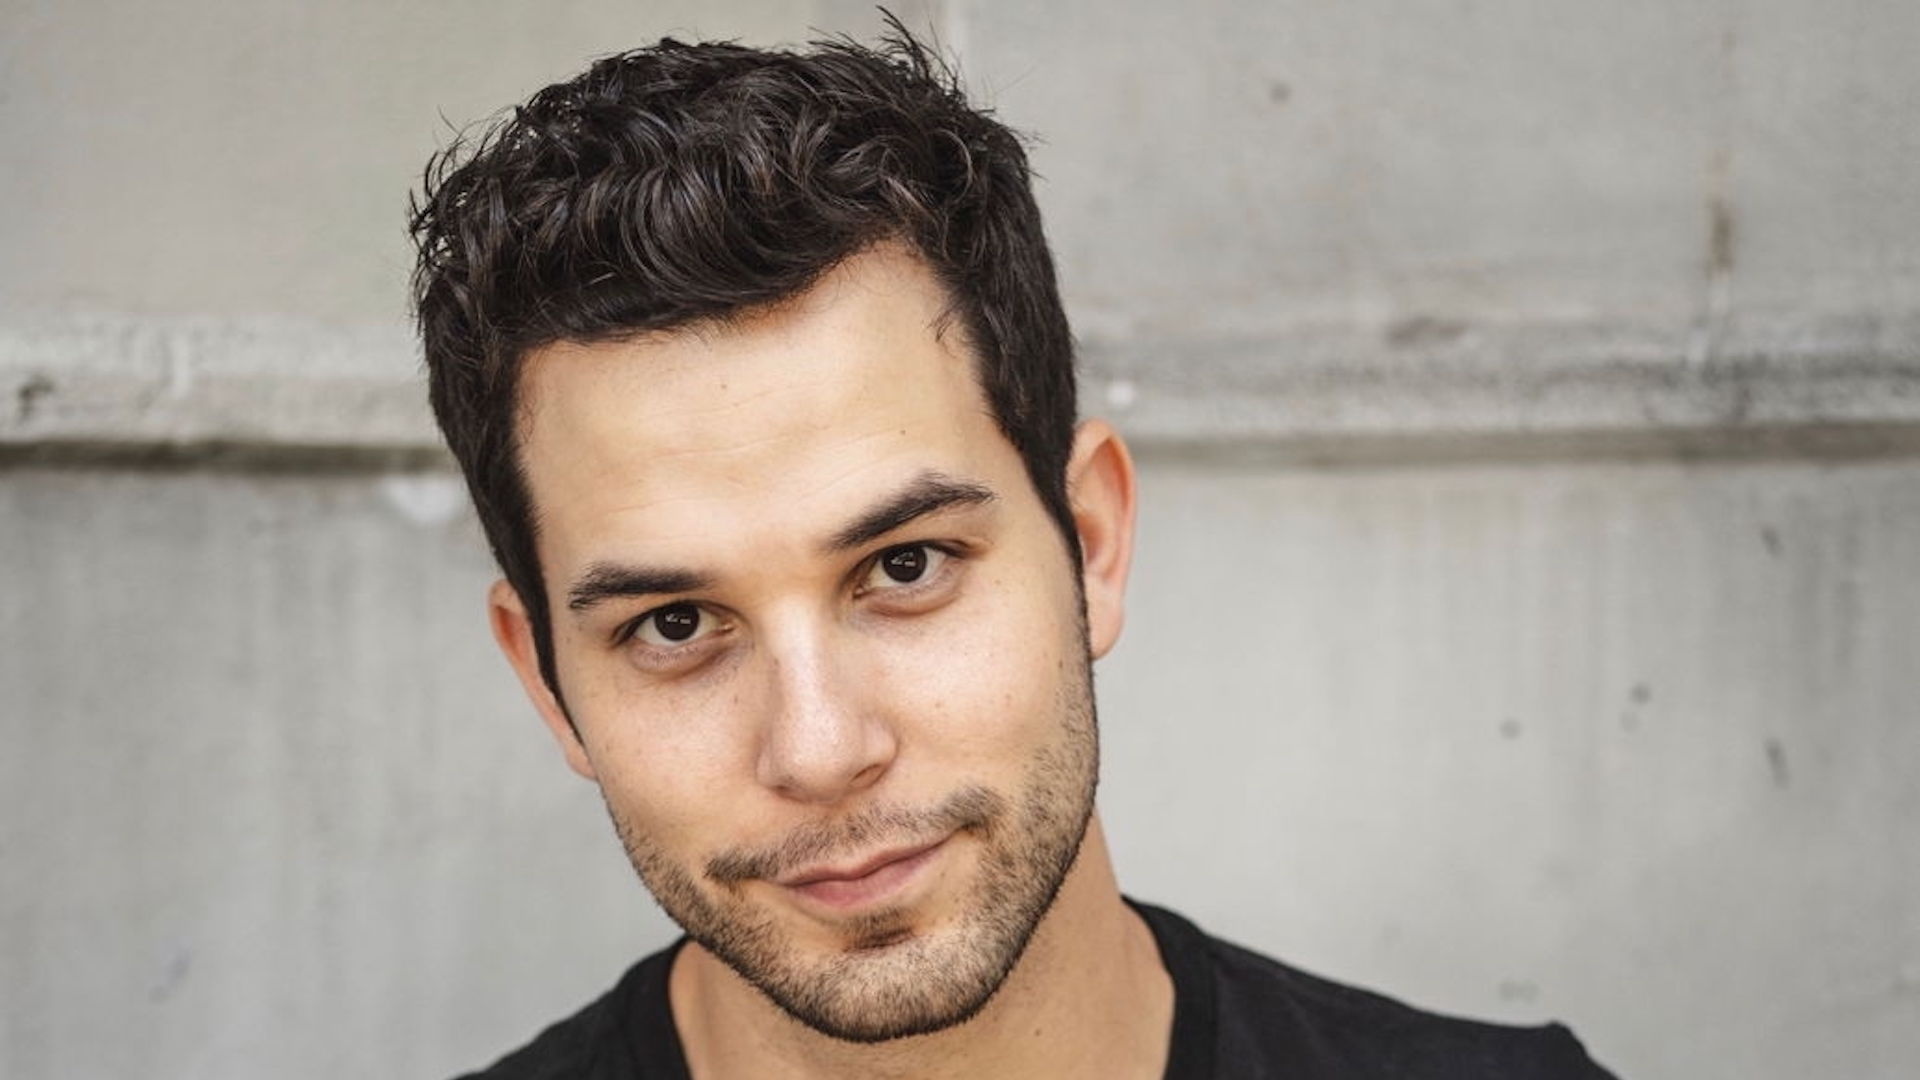 Skylar Astin music, Music featured in shows, TV show soundtrack, TuneFind, 1920x1080 Full HD Desktop